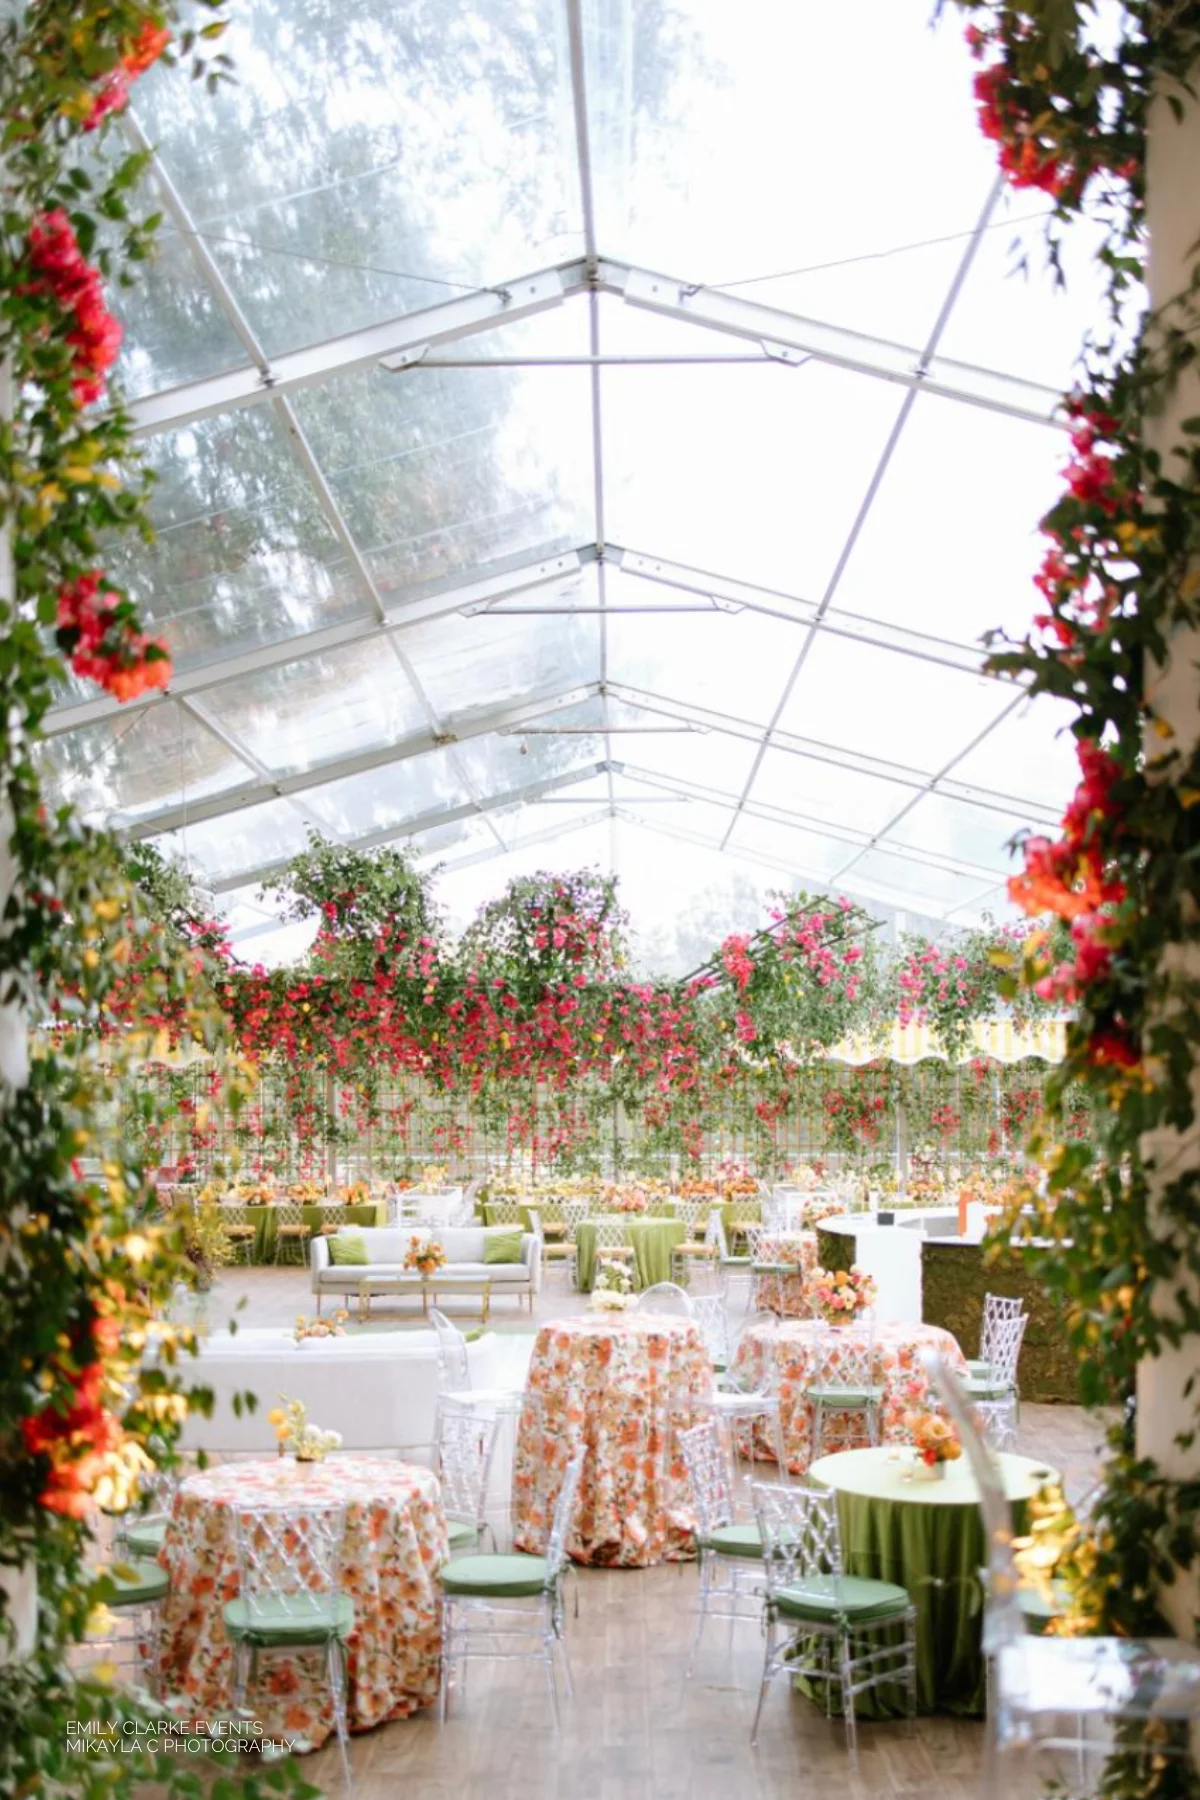 A wedding reception in a tent decorated with flowers and greenery. Our services include table linen rental.